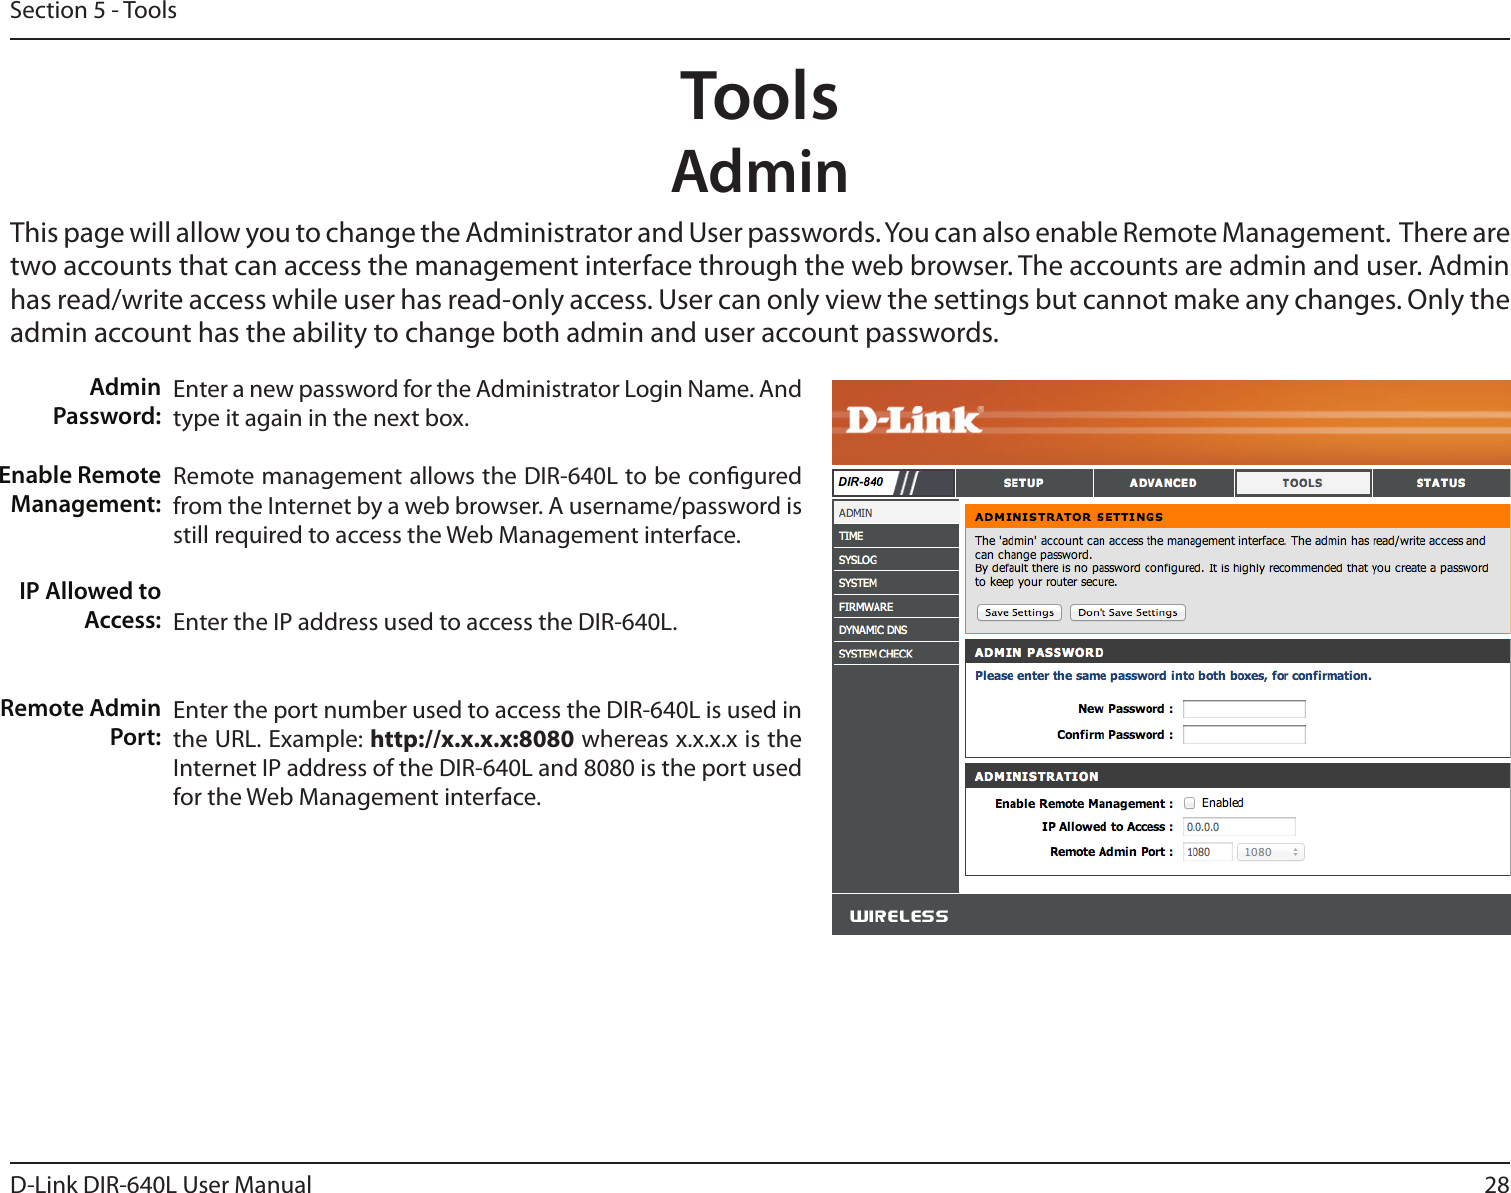 28D-Link DIR-640L User ManualSection 5 - ToolsAdminThis page will allow you to change the Administrator and User passwords. You can also enable Remote Management.  There are two accounts that can access the management interface through the web browser. The accounts are admin and user. Admin has read/write access while user has read-only access. User can only view the settings but cannot make any changes. Only the admin account has the ability to change both admin and user account passwords.ToolsEnter a new password for the Administrator Login Name. And type it again in the next box.Remote management allows the DIR-640L to be congured from the Internet by a web browser. A username/password is still required to access the Web Management interface. Enter the IP address used to access the DIR-640L.Enter the port number used to access the DIR-640L is used in the URL. Example: http://x.x.x.x:8080 whereas x.x.x.x is the Internet IP address of the DIR-640L and 8080 is the port used for the Web Management interface.Admin Password:Enable Remote Management:IP Allowed to Access:Remote Admin Port: